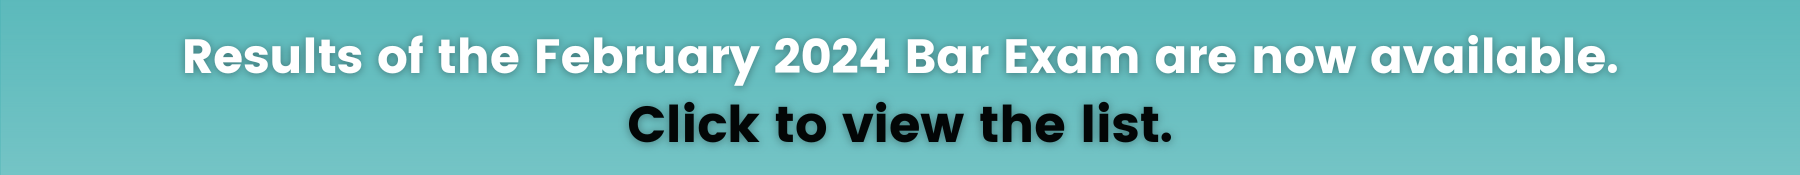 Results of the February 2024 Bar Exam are now available. Click to view the list.